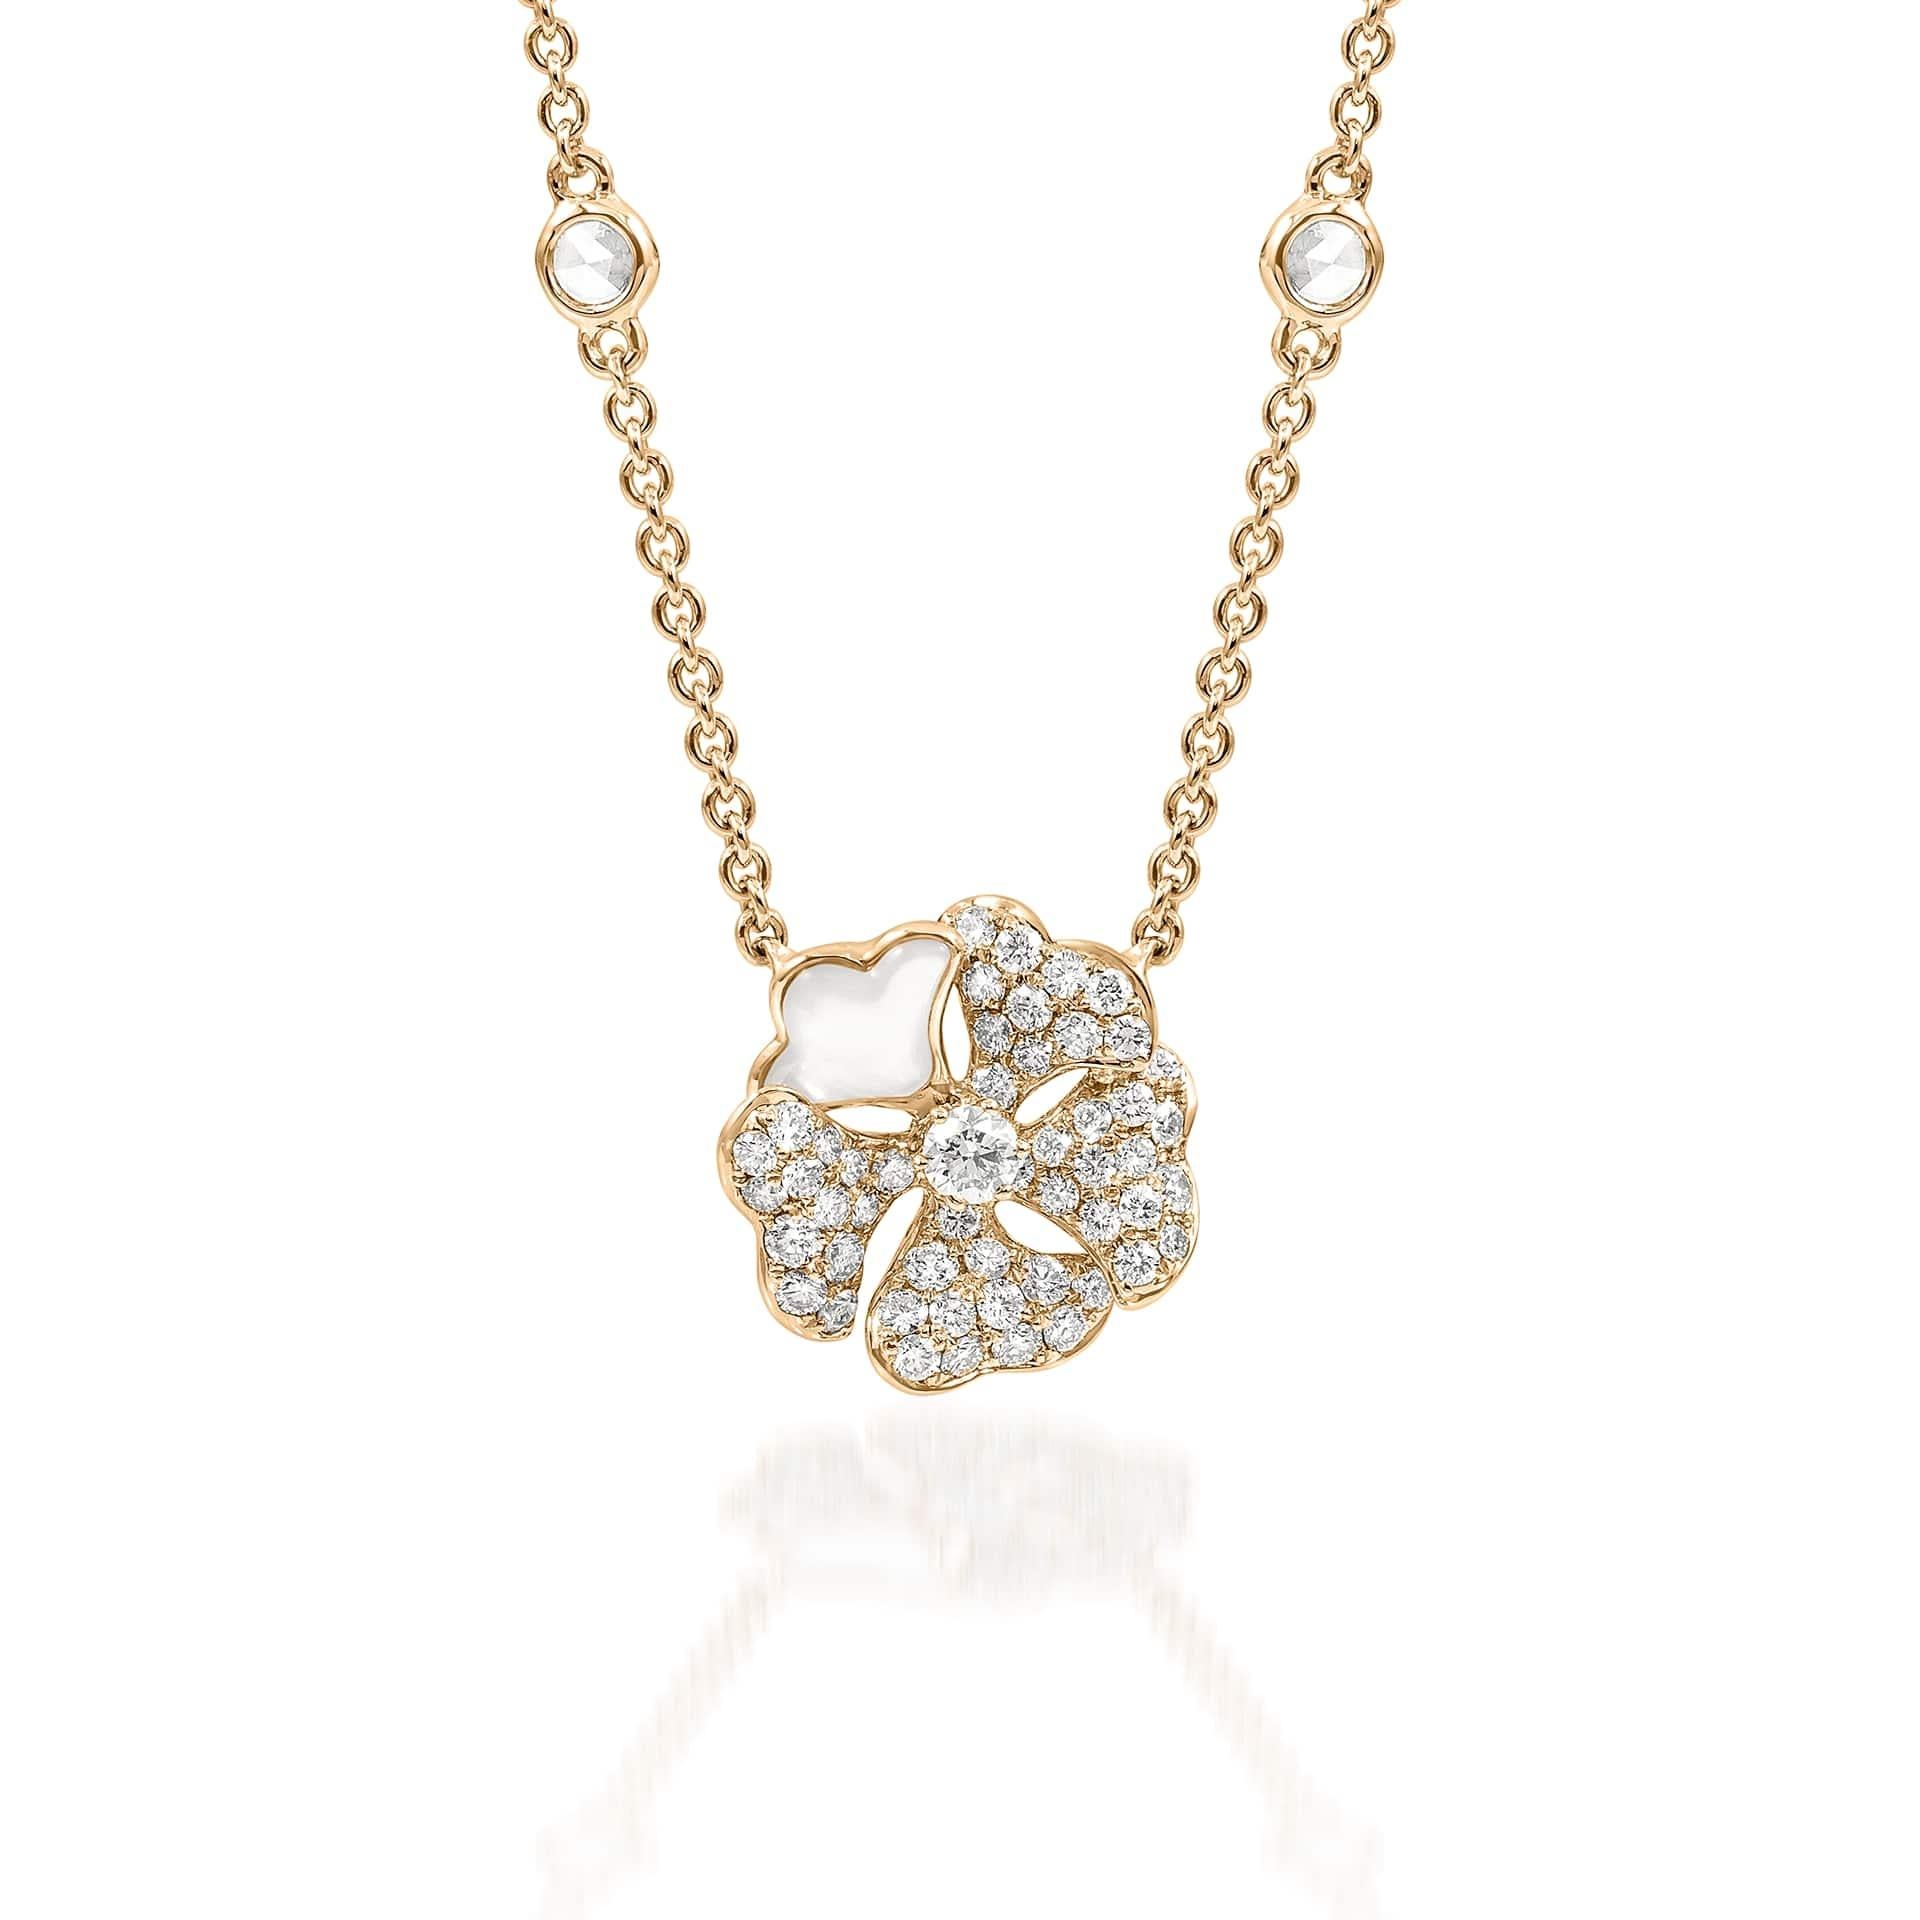 Bloom Pavé Diamond and Mother-of-Pearl Flower Necklace in 18K Yellow Gold

Inspired by the exquisite petals of the alpine cinquefoil flower, the Bloom collection combines the richness of diamonds and precious metals with the light versatility of